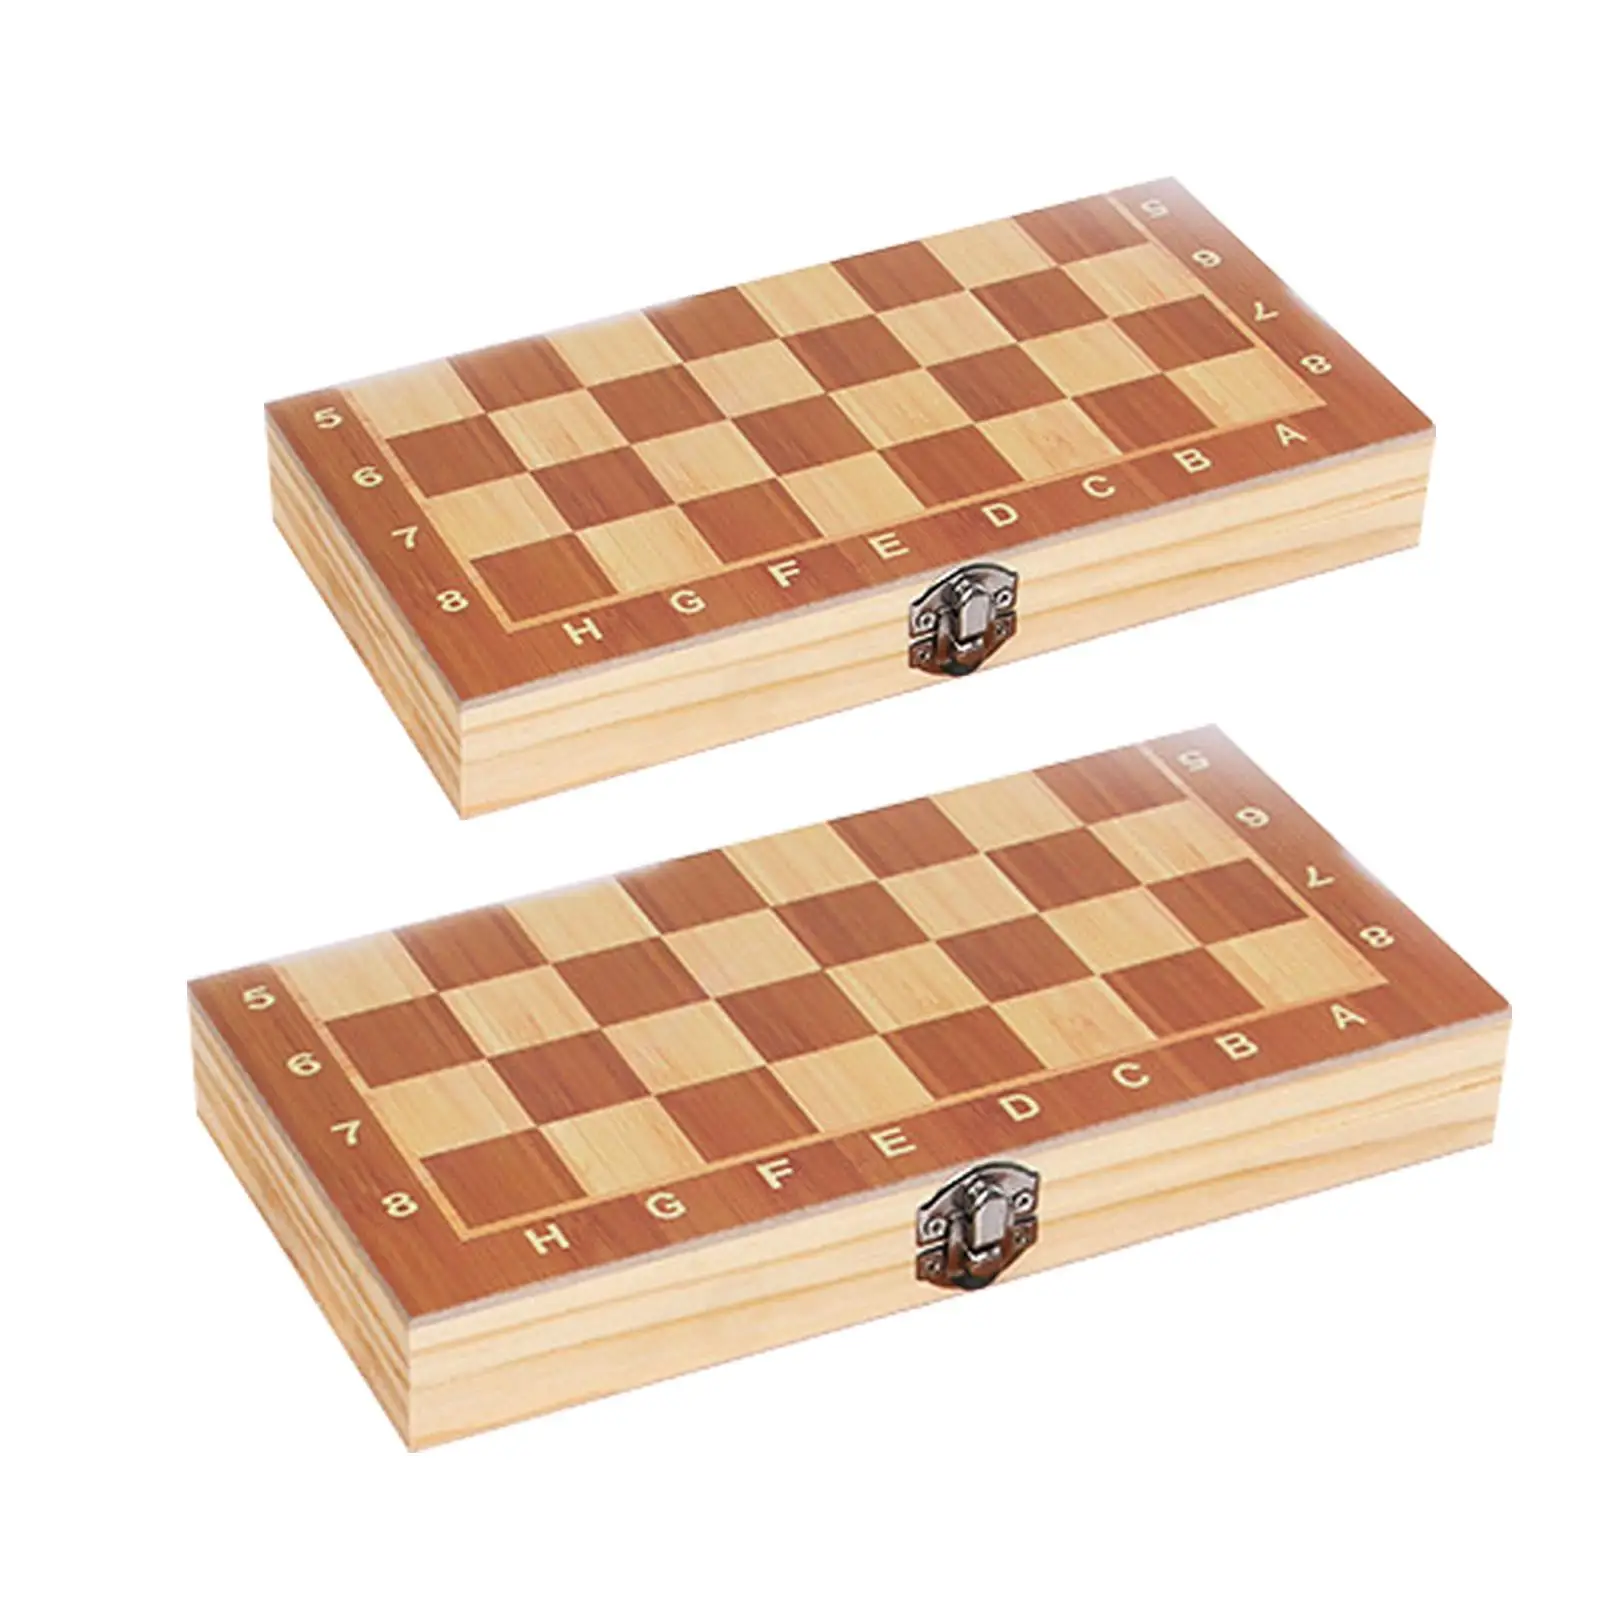 Chess Backgammon Set Foldable Chess Board Educational Toy, Board Game for All